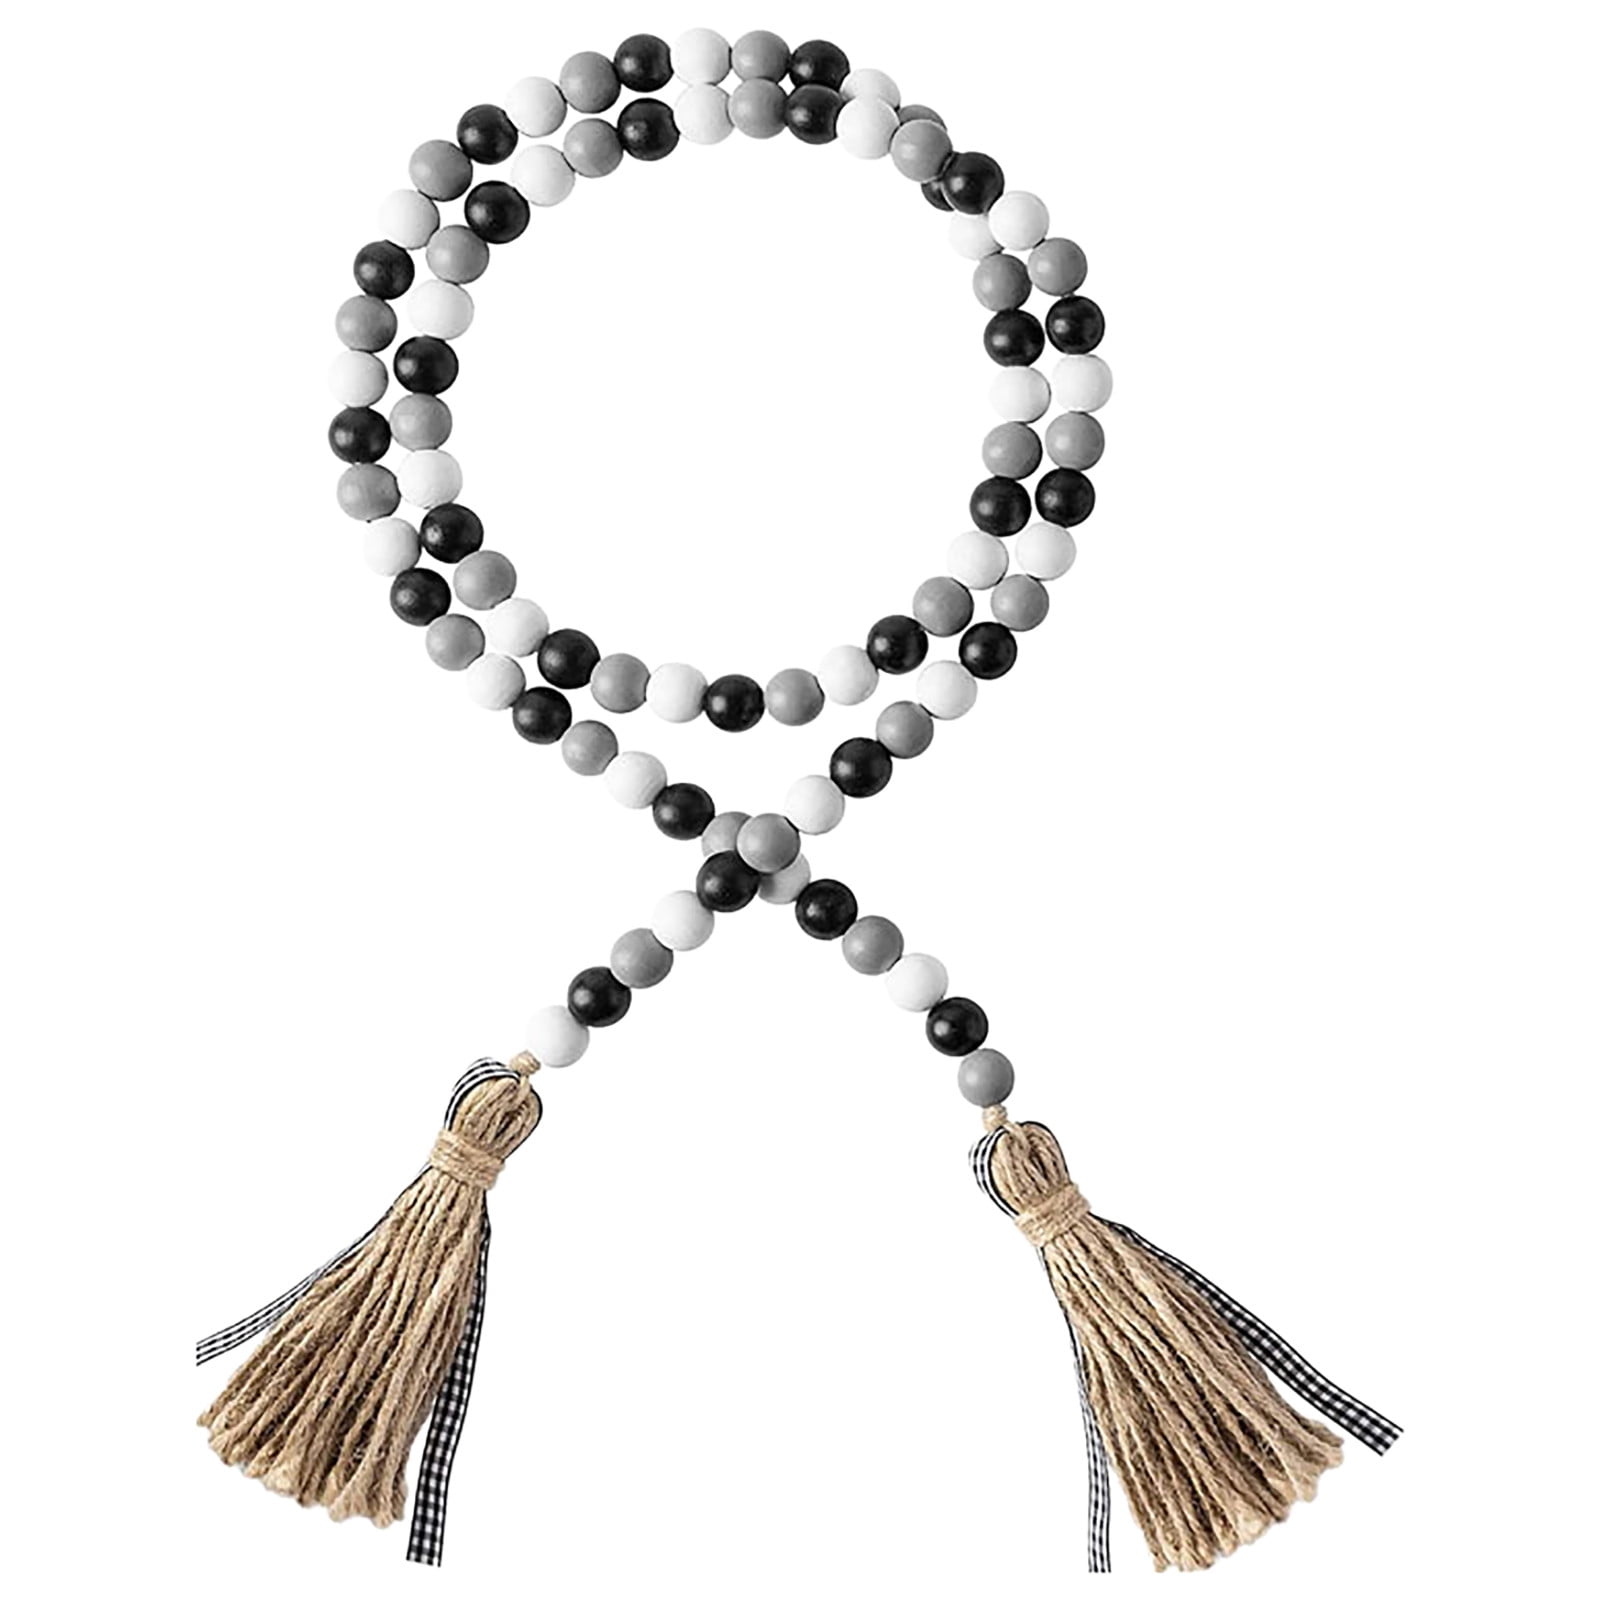 Details about   Fashion Ornament 9’ Black And White Bead Garland 